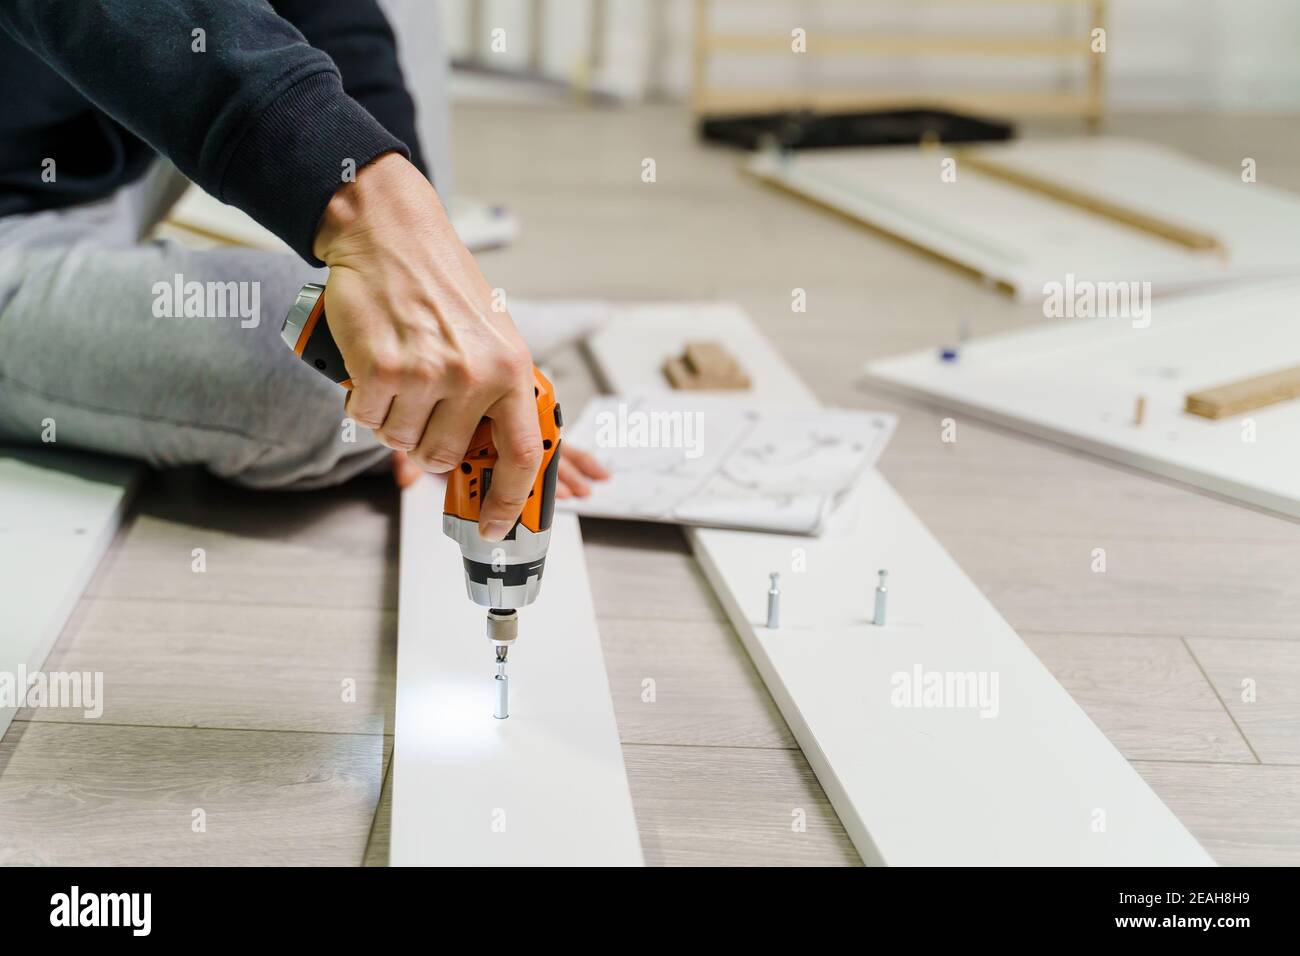 Close up on midsection of unknown caucasian man holding electric screwdriver while putting together Self assembly furniture of plywood screwing screws Stock Photo